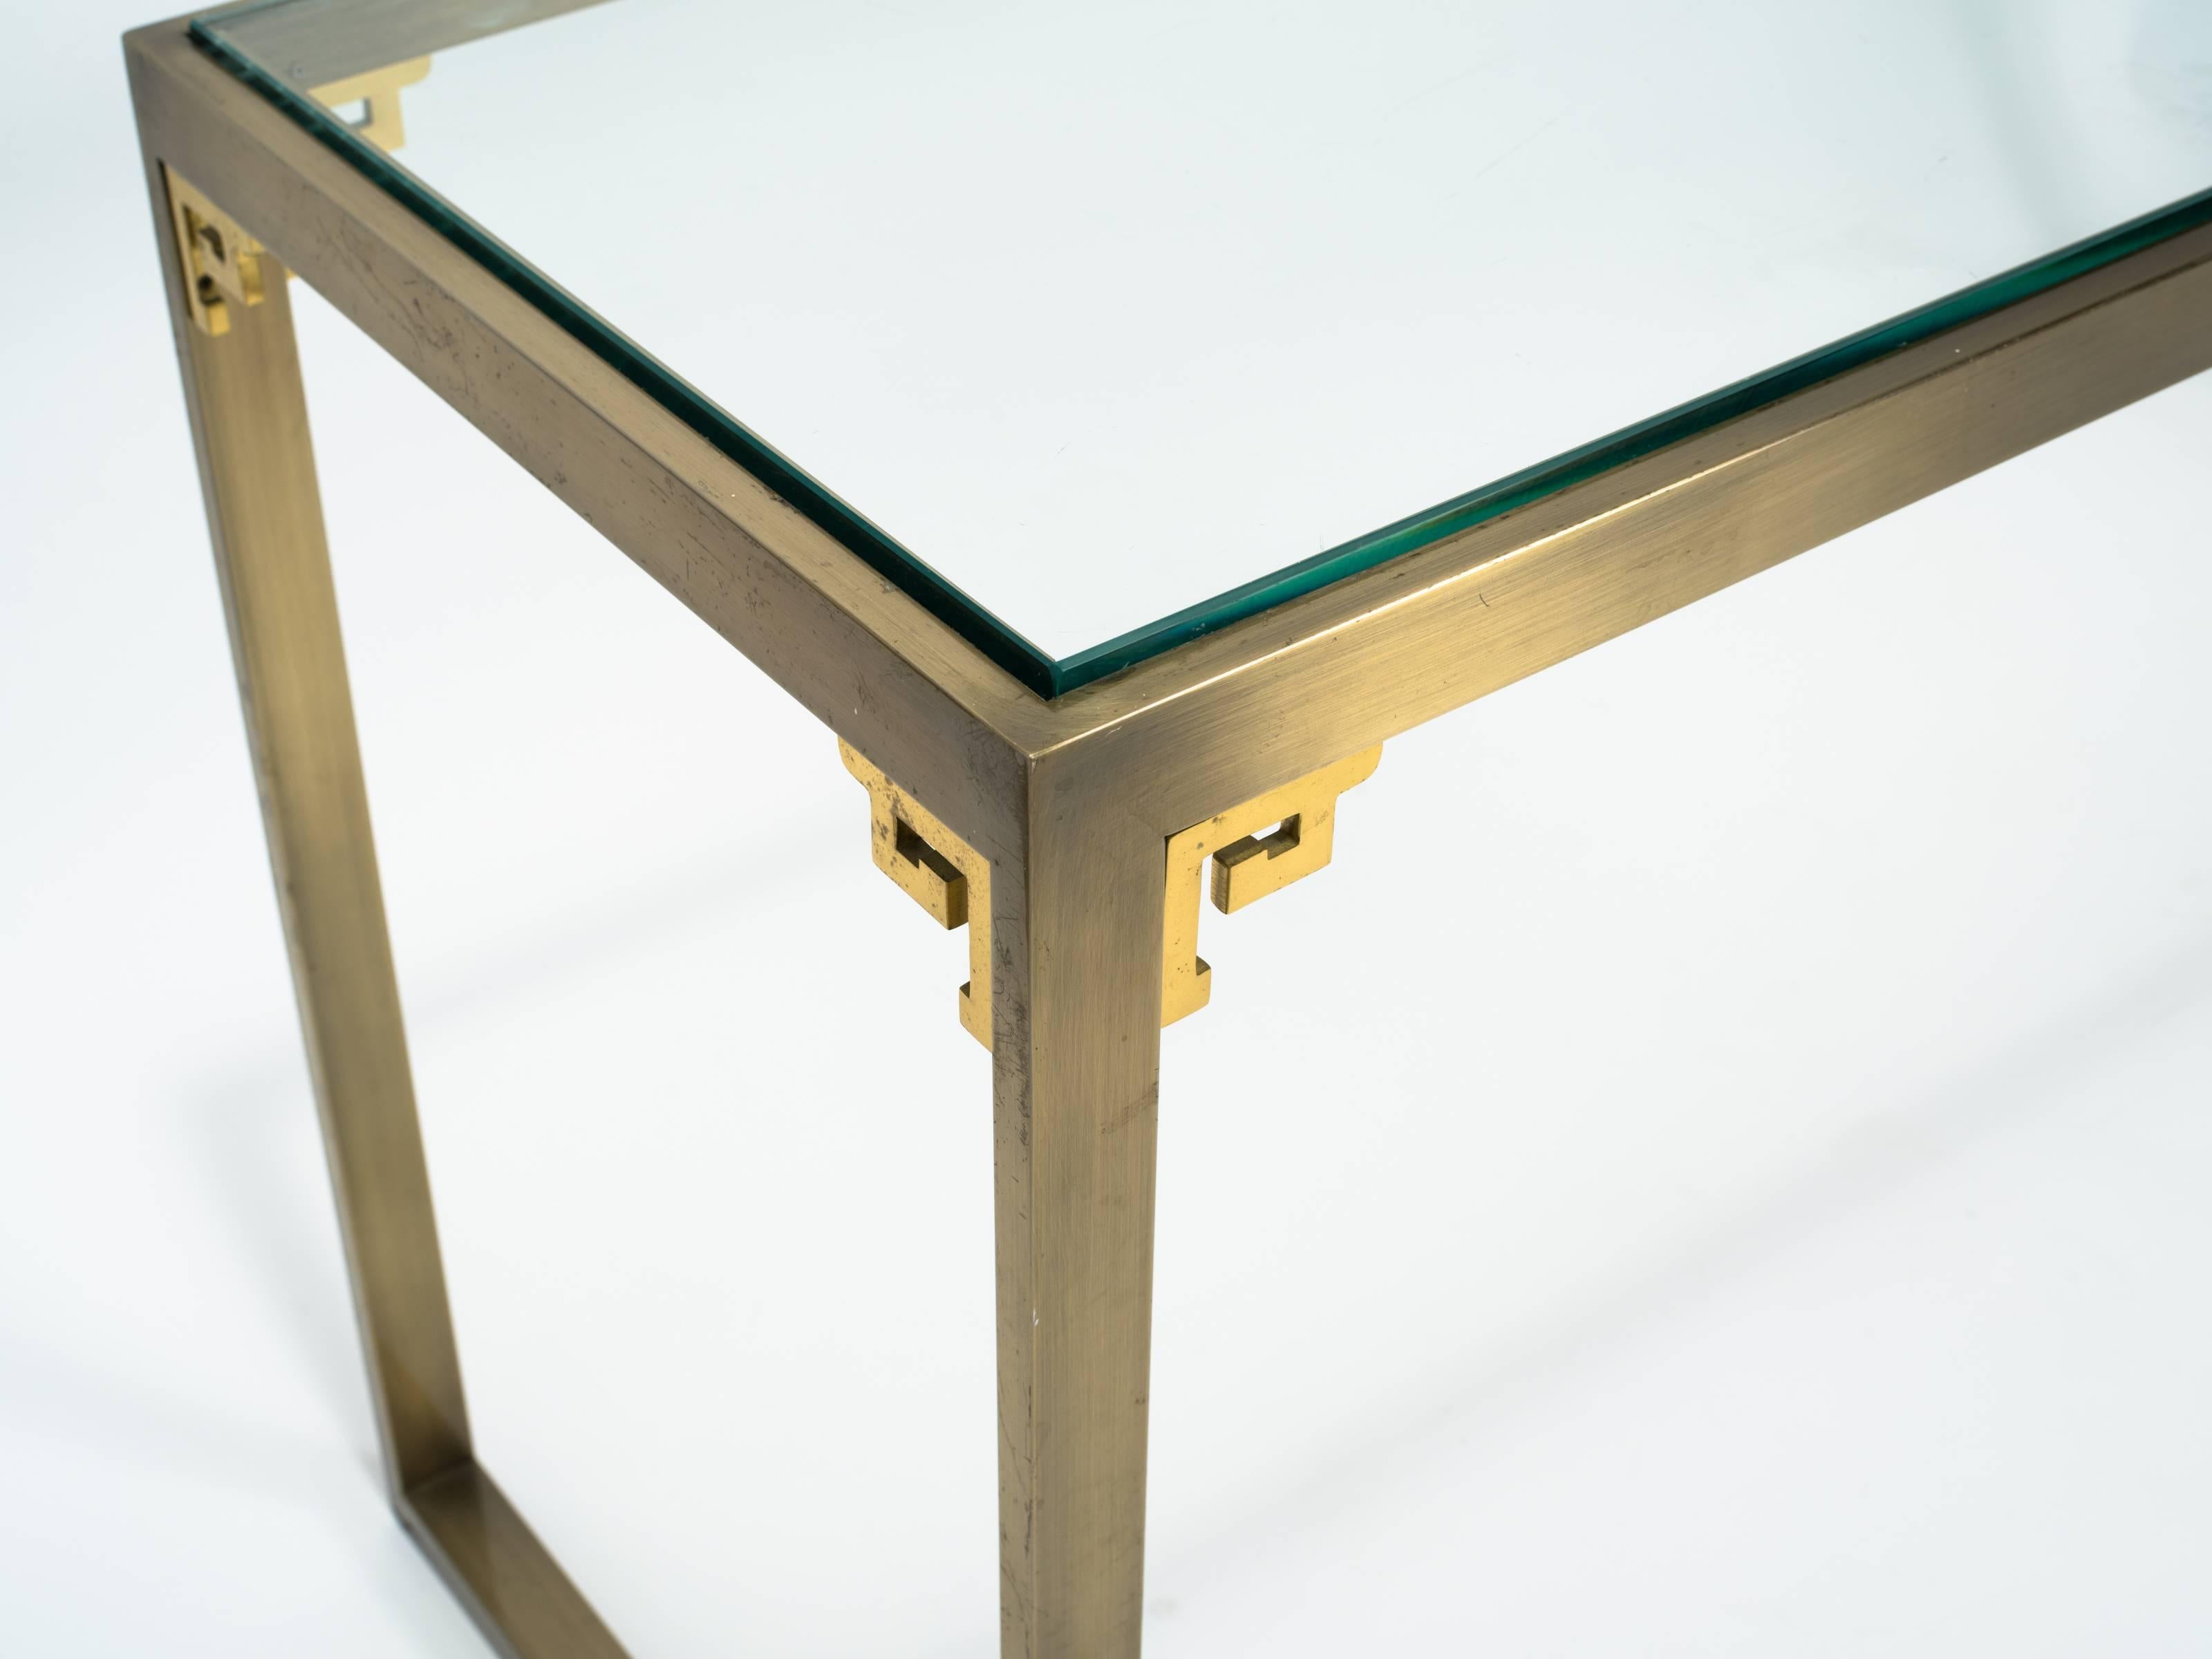 Late 20th Century Greek Key Brass Console Table by Design Institute of America